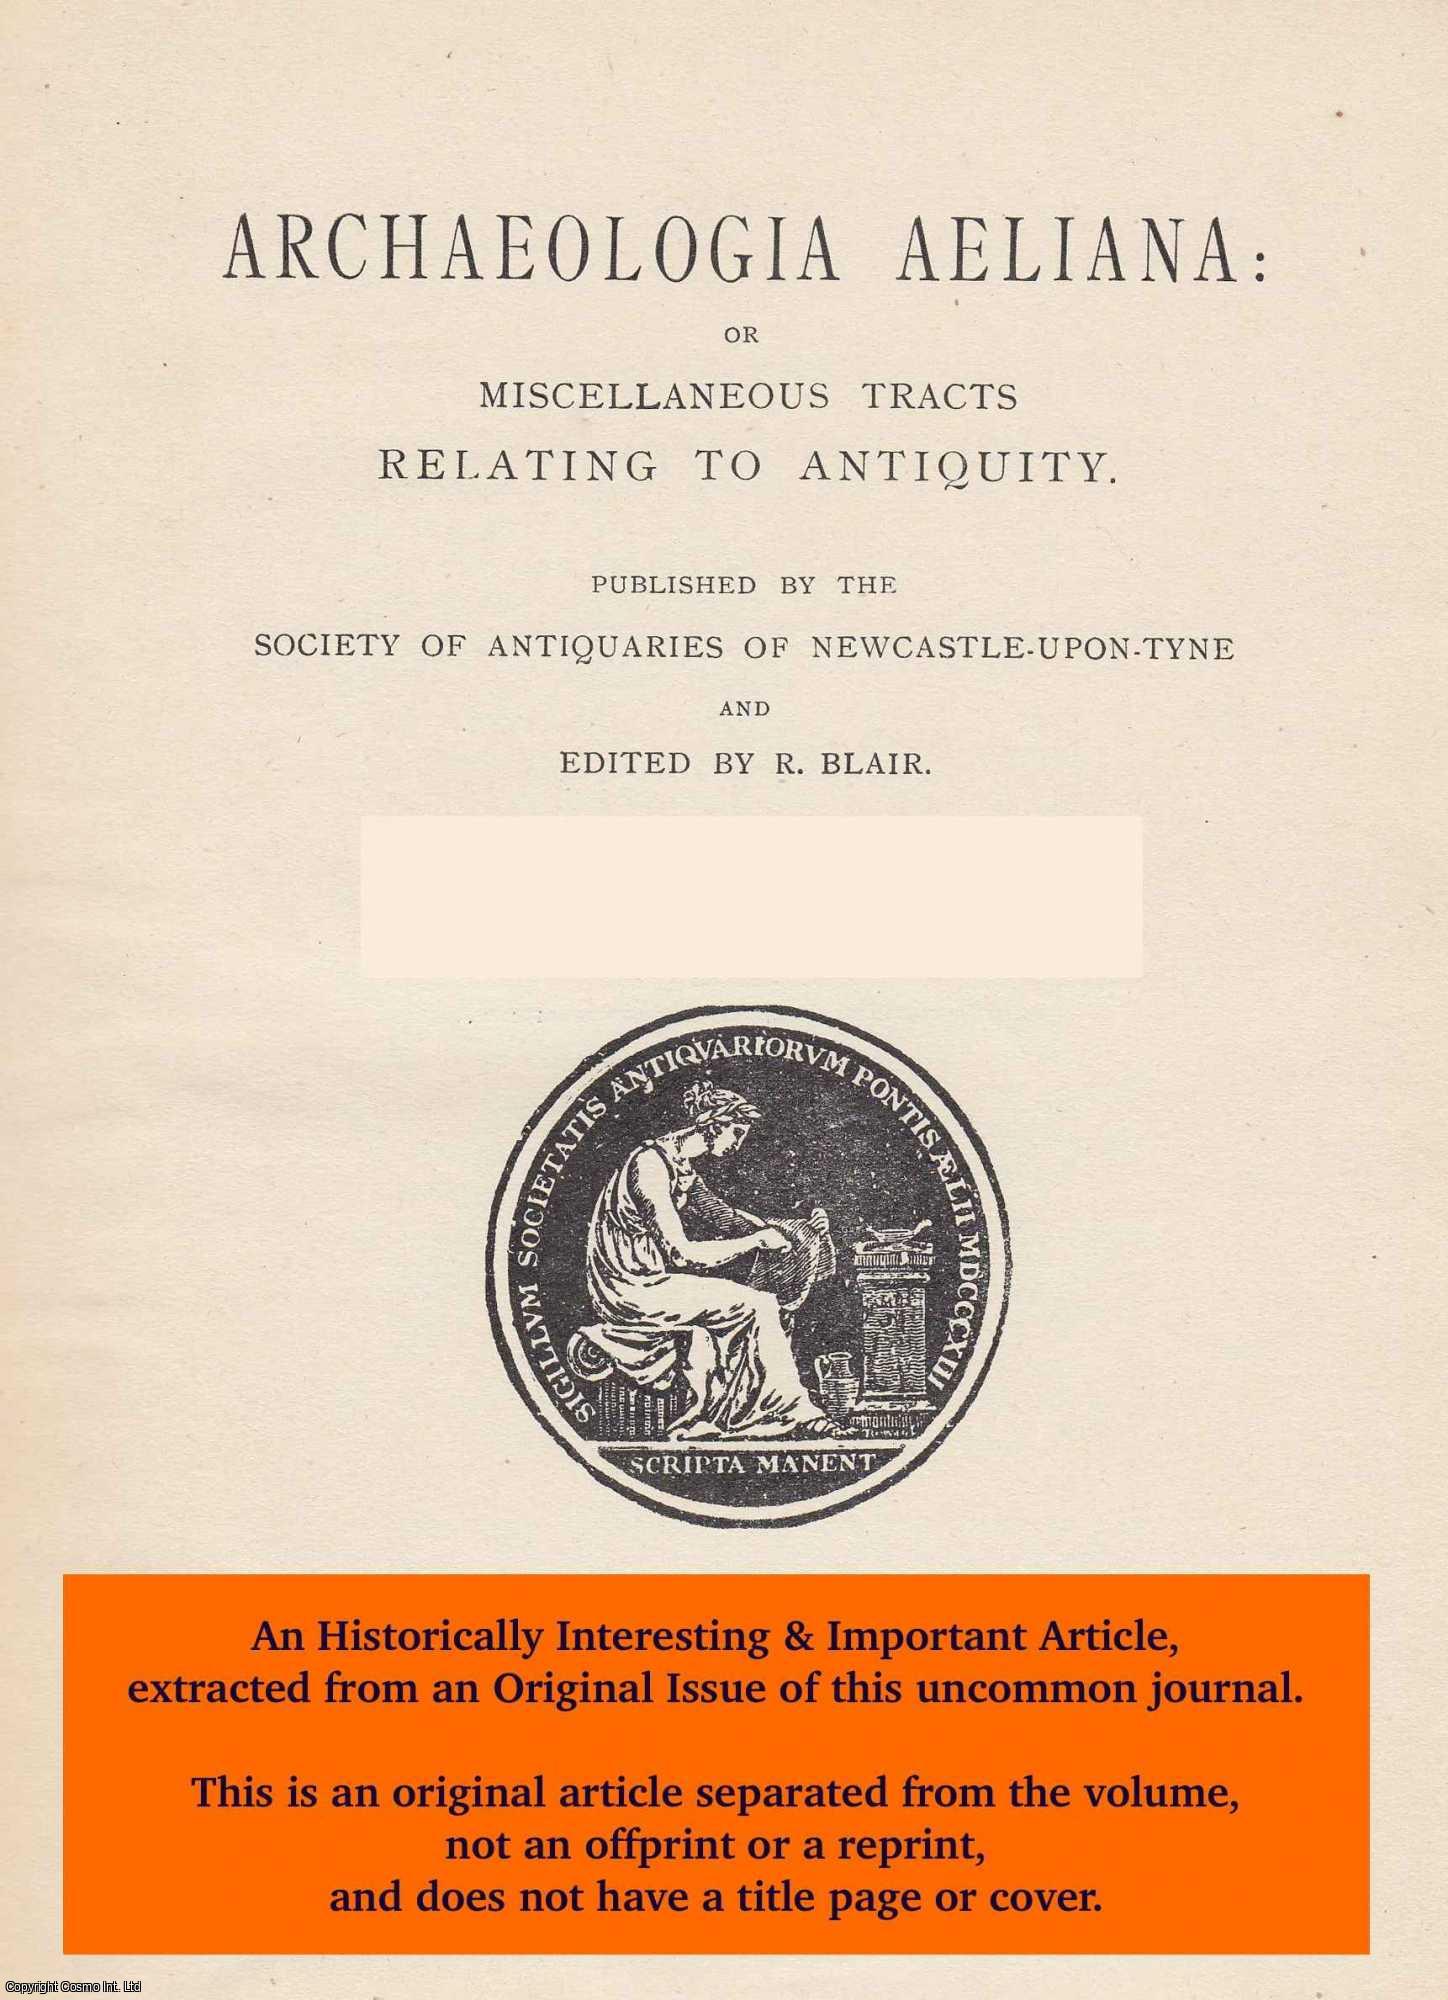 M. R. Hull, M. R. - The Excavations at Aesica, 1925-Interim Report. An original article from The Archaeologia Aeliana: or Miscellaneous Tracts Relating to Antiquity, 1926.